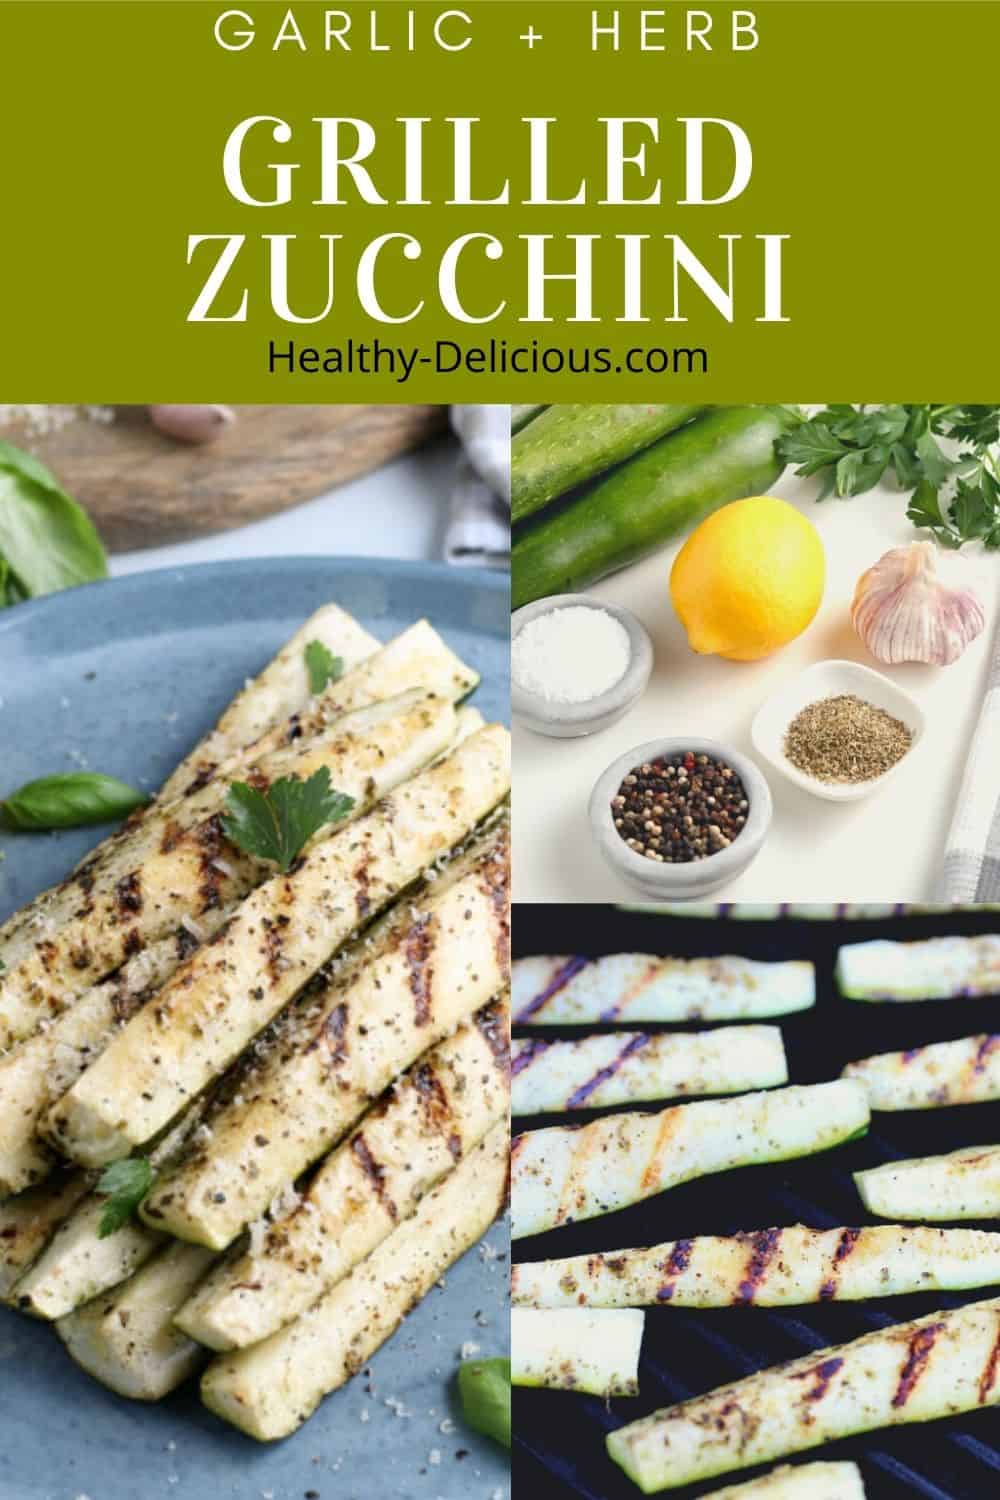 Zucchini makes an appearance on our table at least once a week this time of year. I love the texture that grilled zucchini has and its neutral flavor means it goes well with everything from chicken to burgers. This is my favorite recipe - plus tips for success! #grilling #vegetables #zucchini #lowcarb #keto via @HealthyDelish